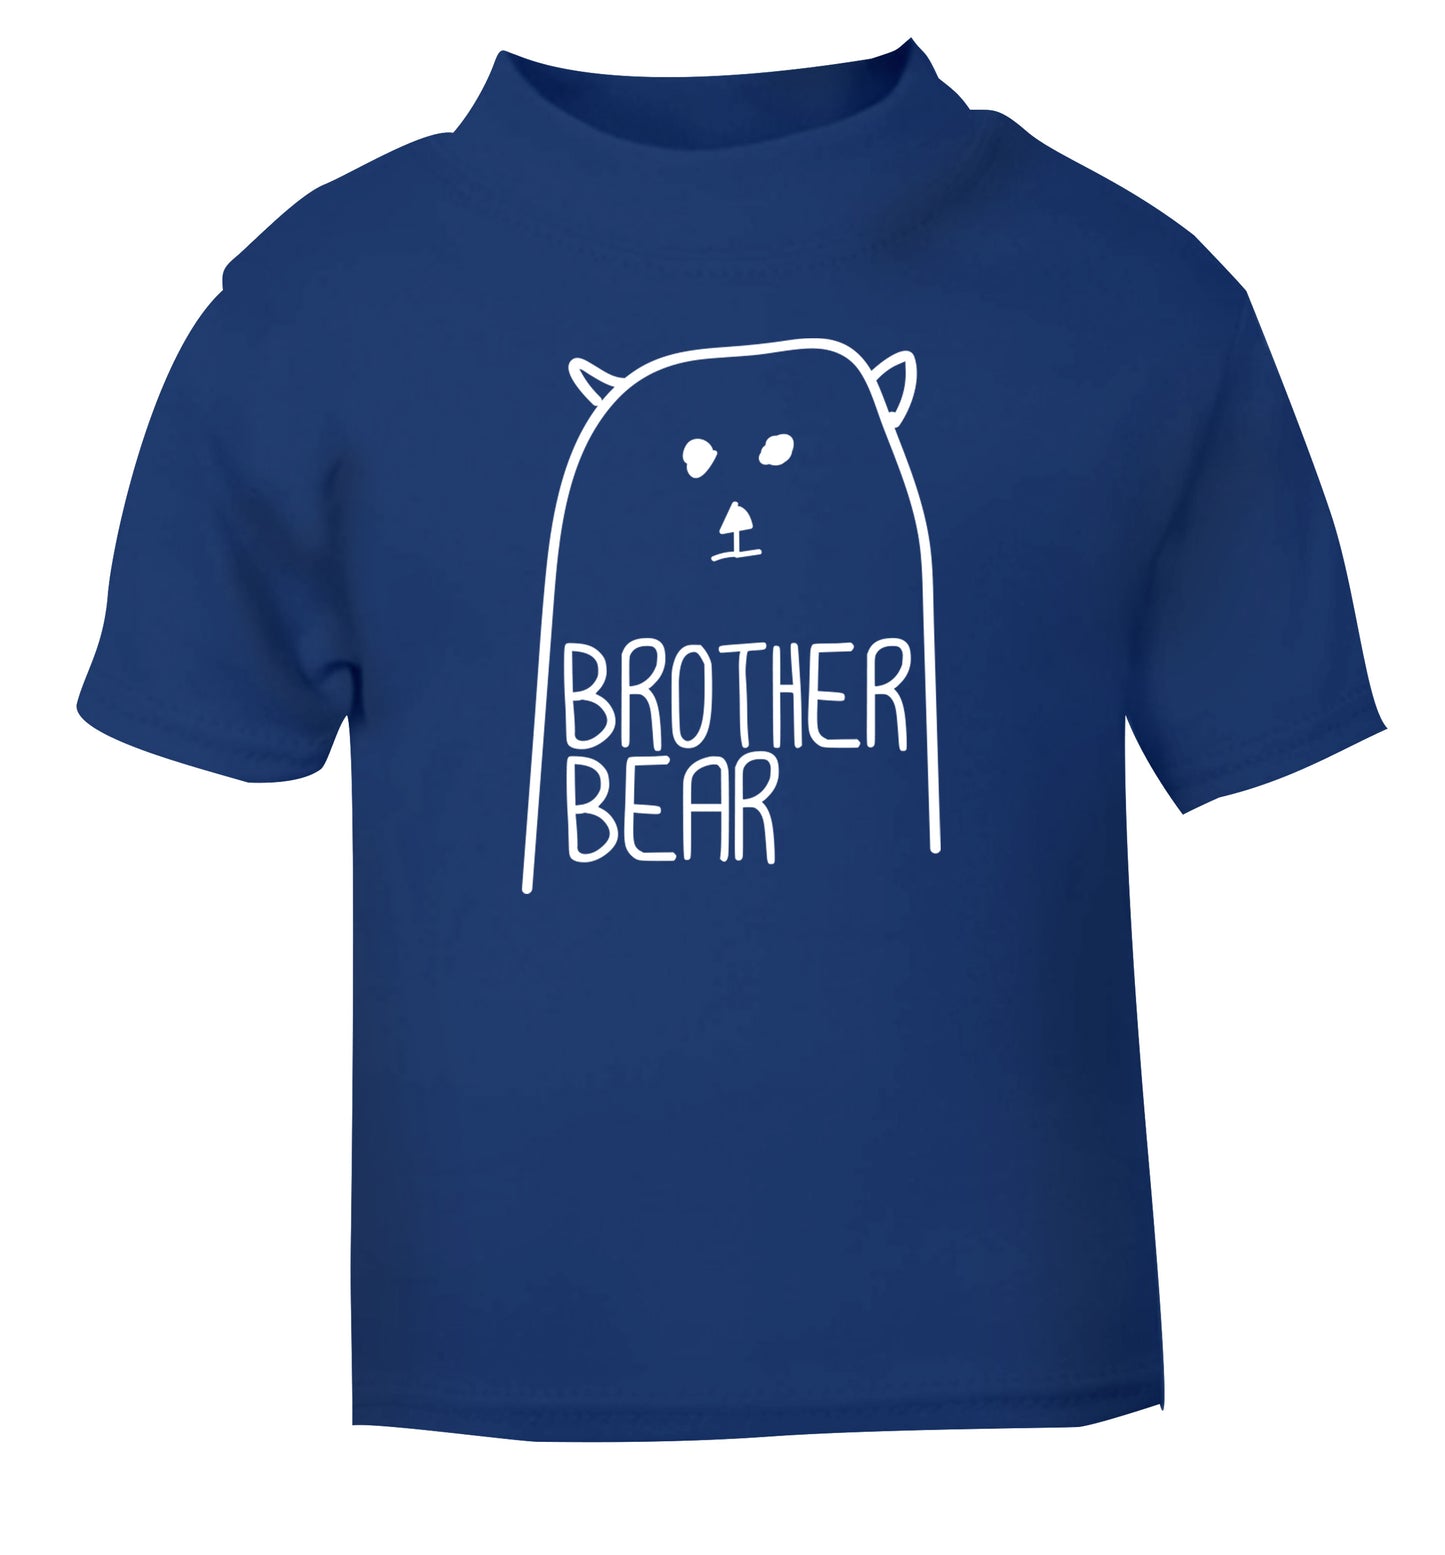 Brother bear blue Baby Toddler Tshirt 2 Years